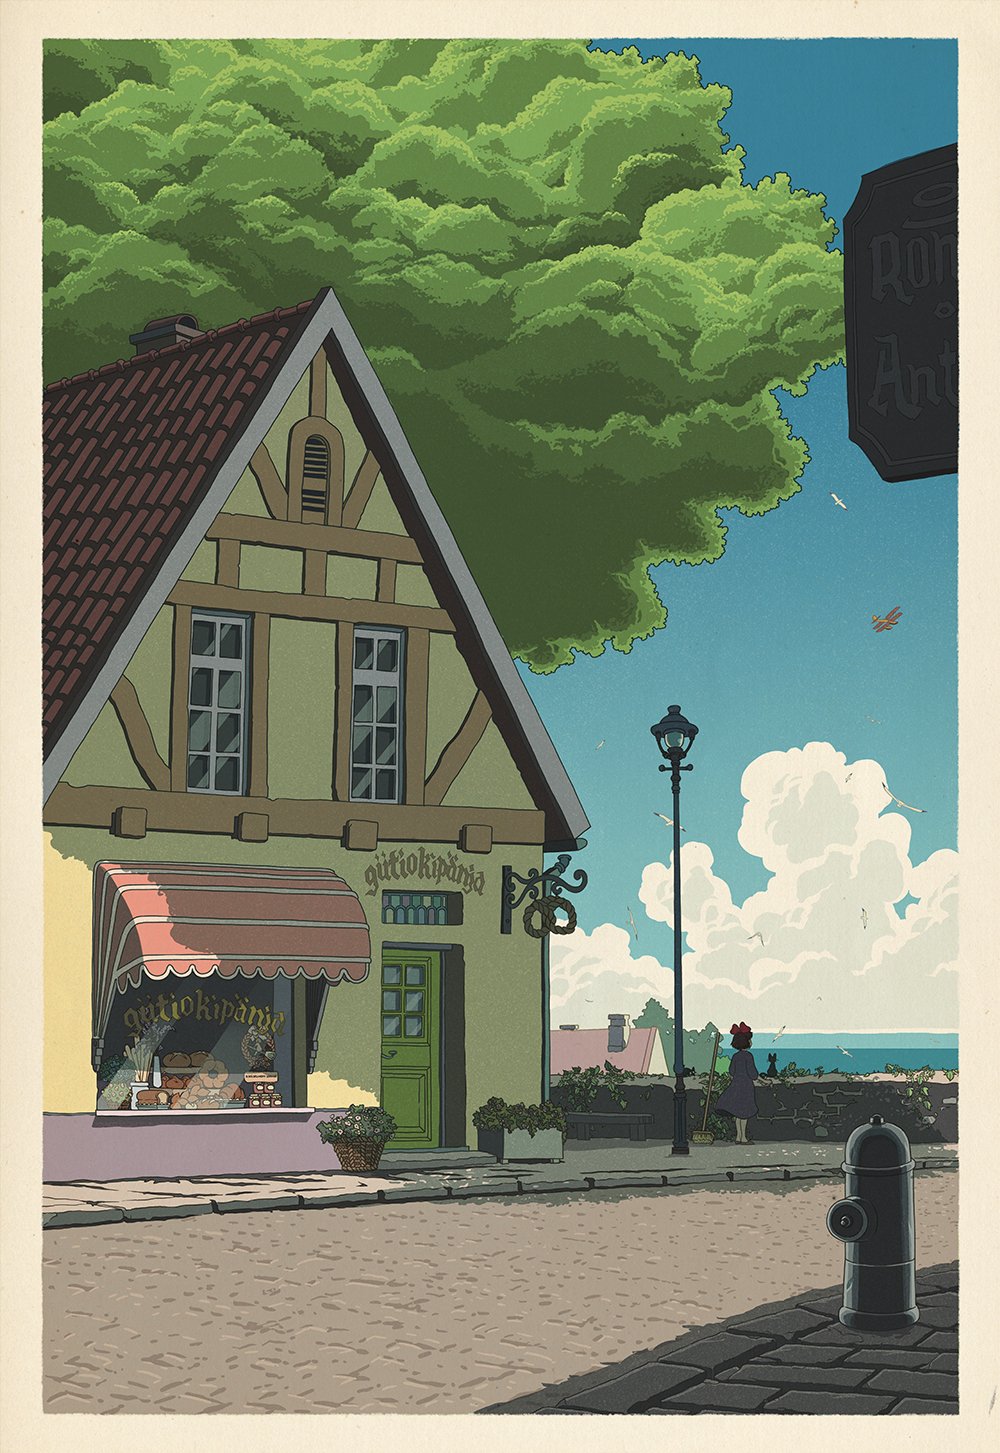 The Serenity Of Hayao Miyazaki’s Films Is Perfectly Captured In These Posters